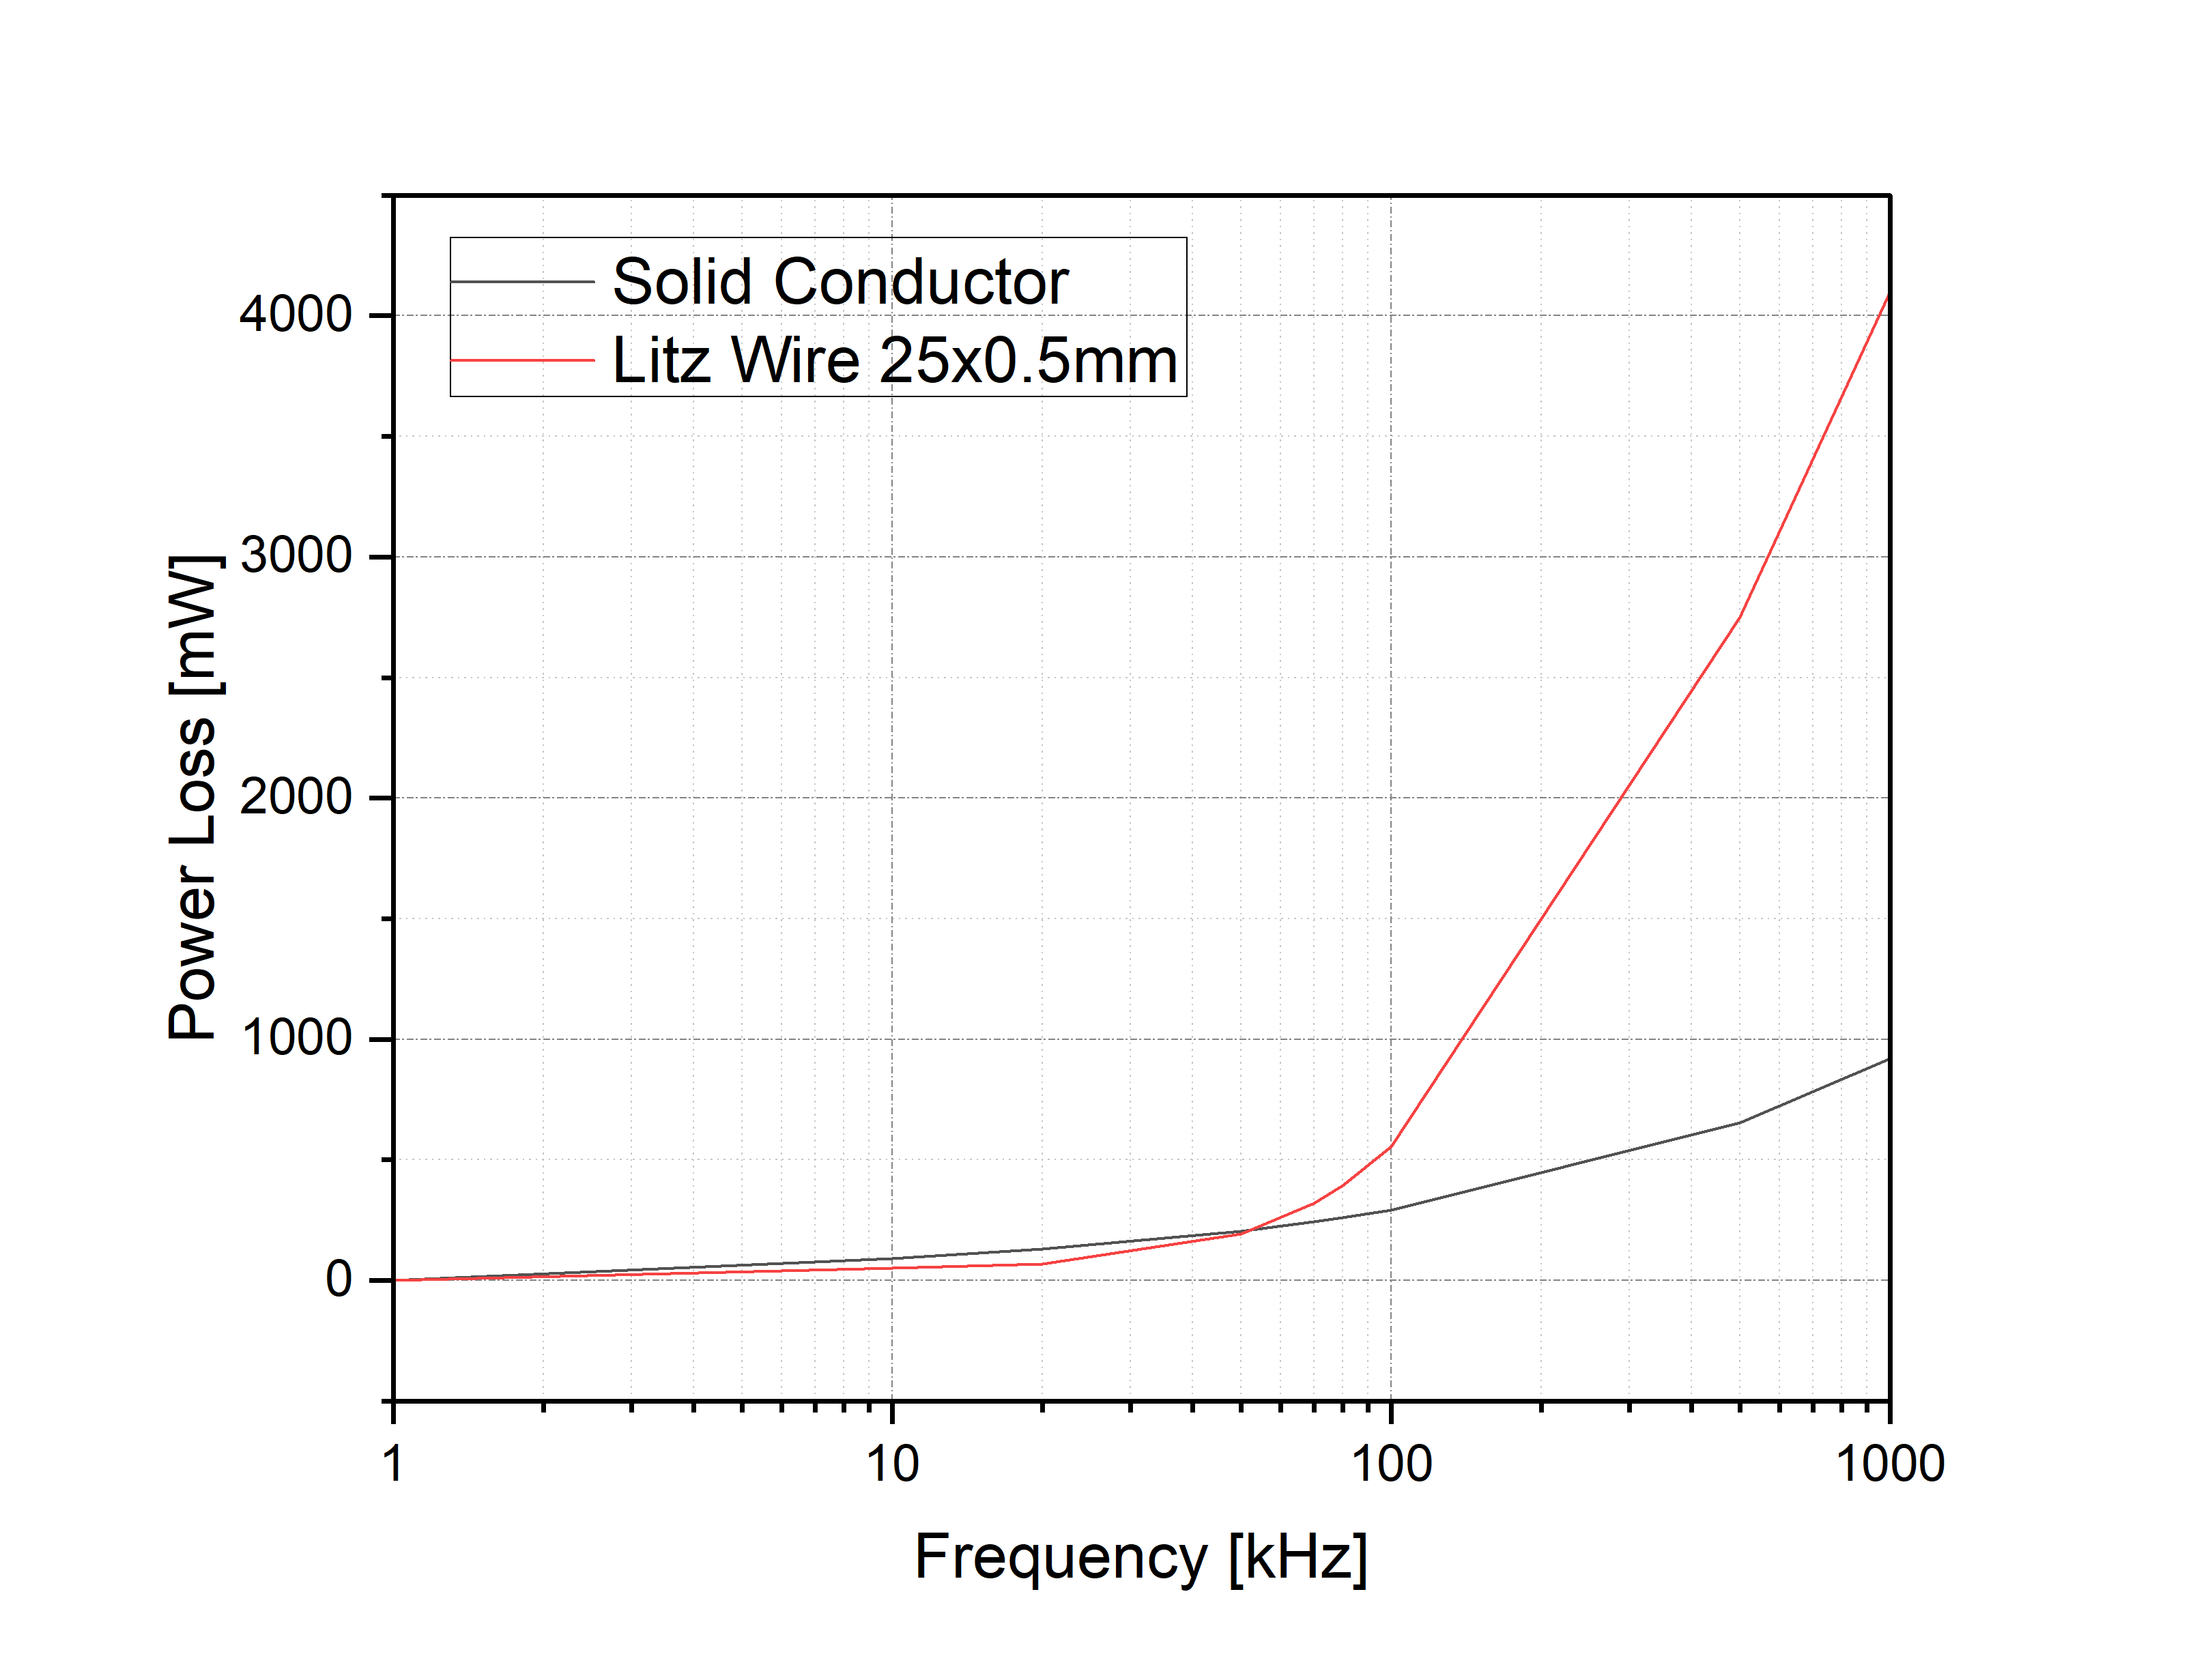 Performance comparison between Litz wire conductor and solid conductor  